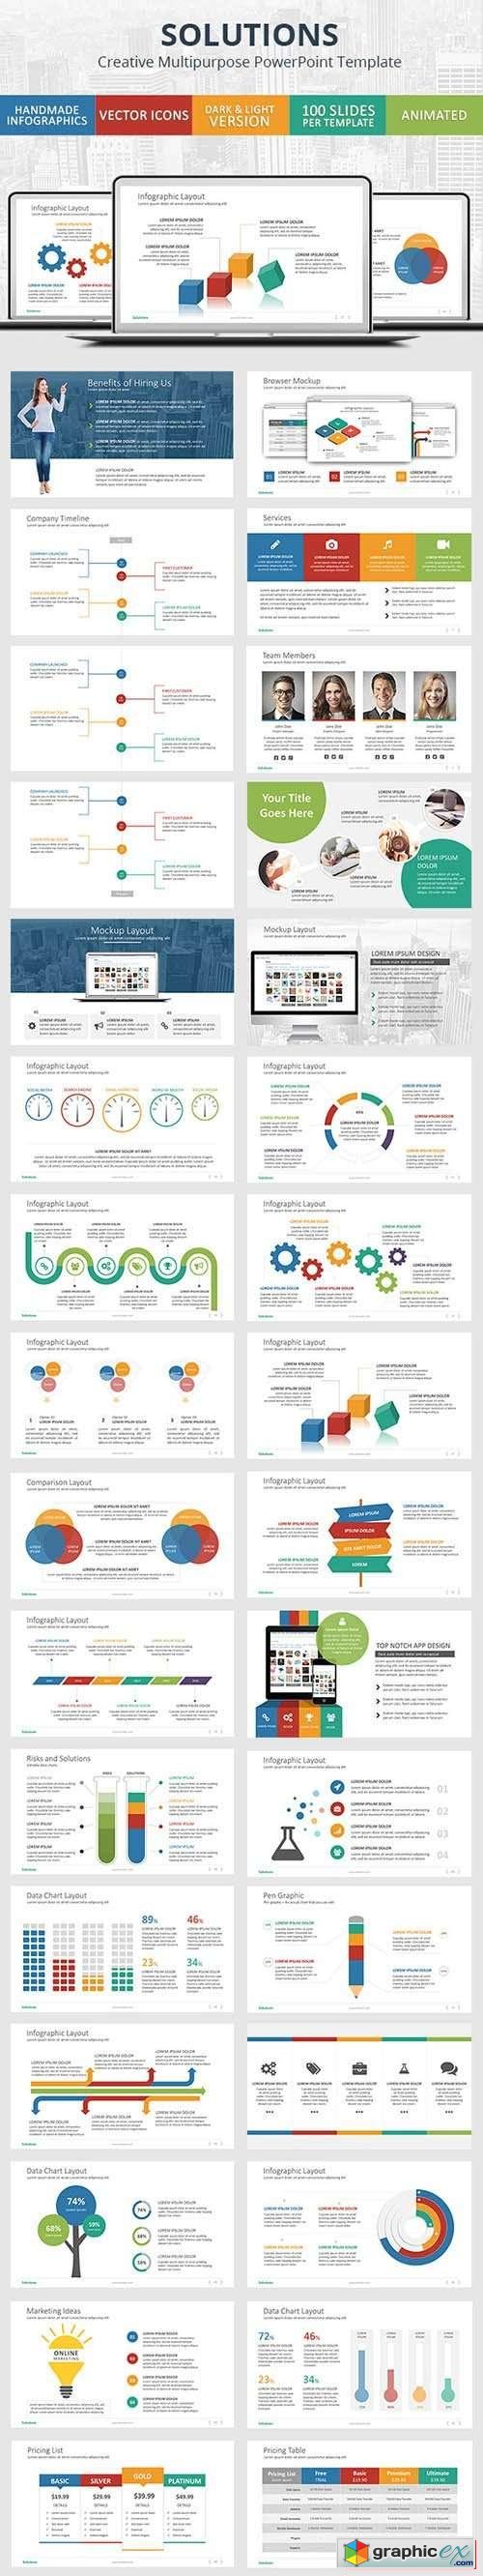 GraphicRiver - Solutions - PowerPoint Presentation Template 10284842